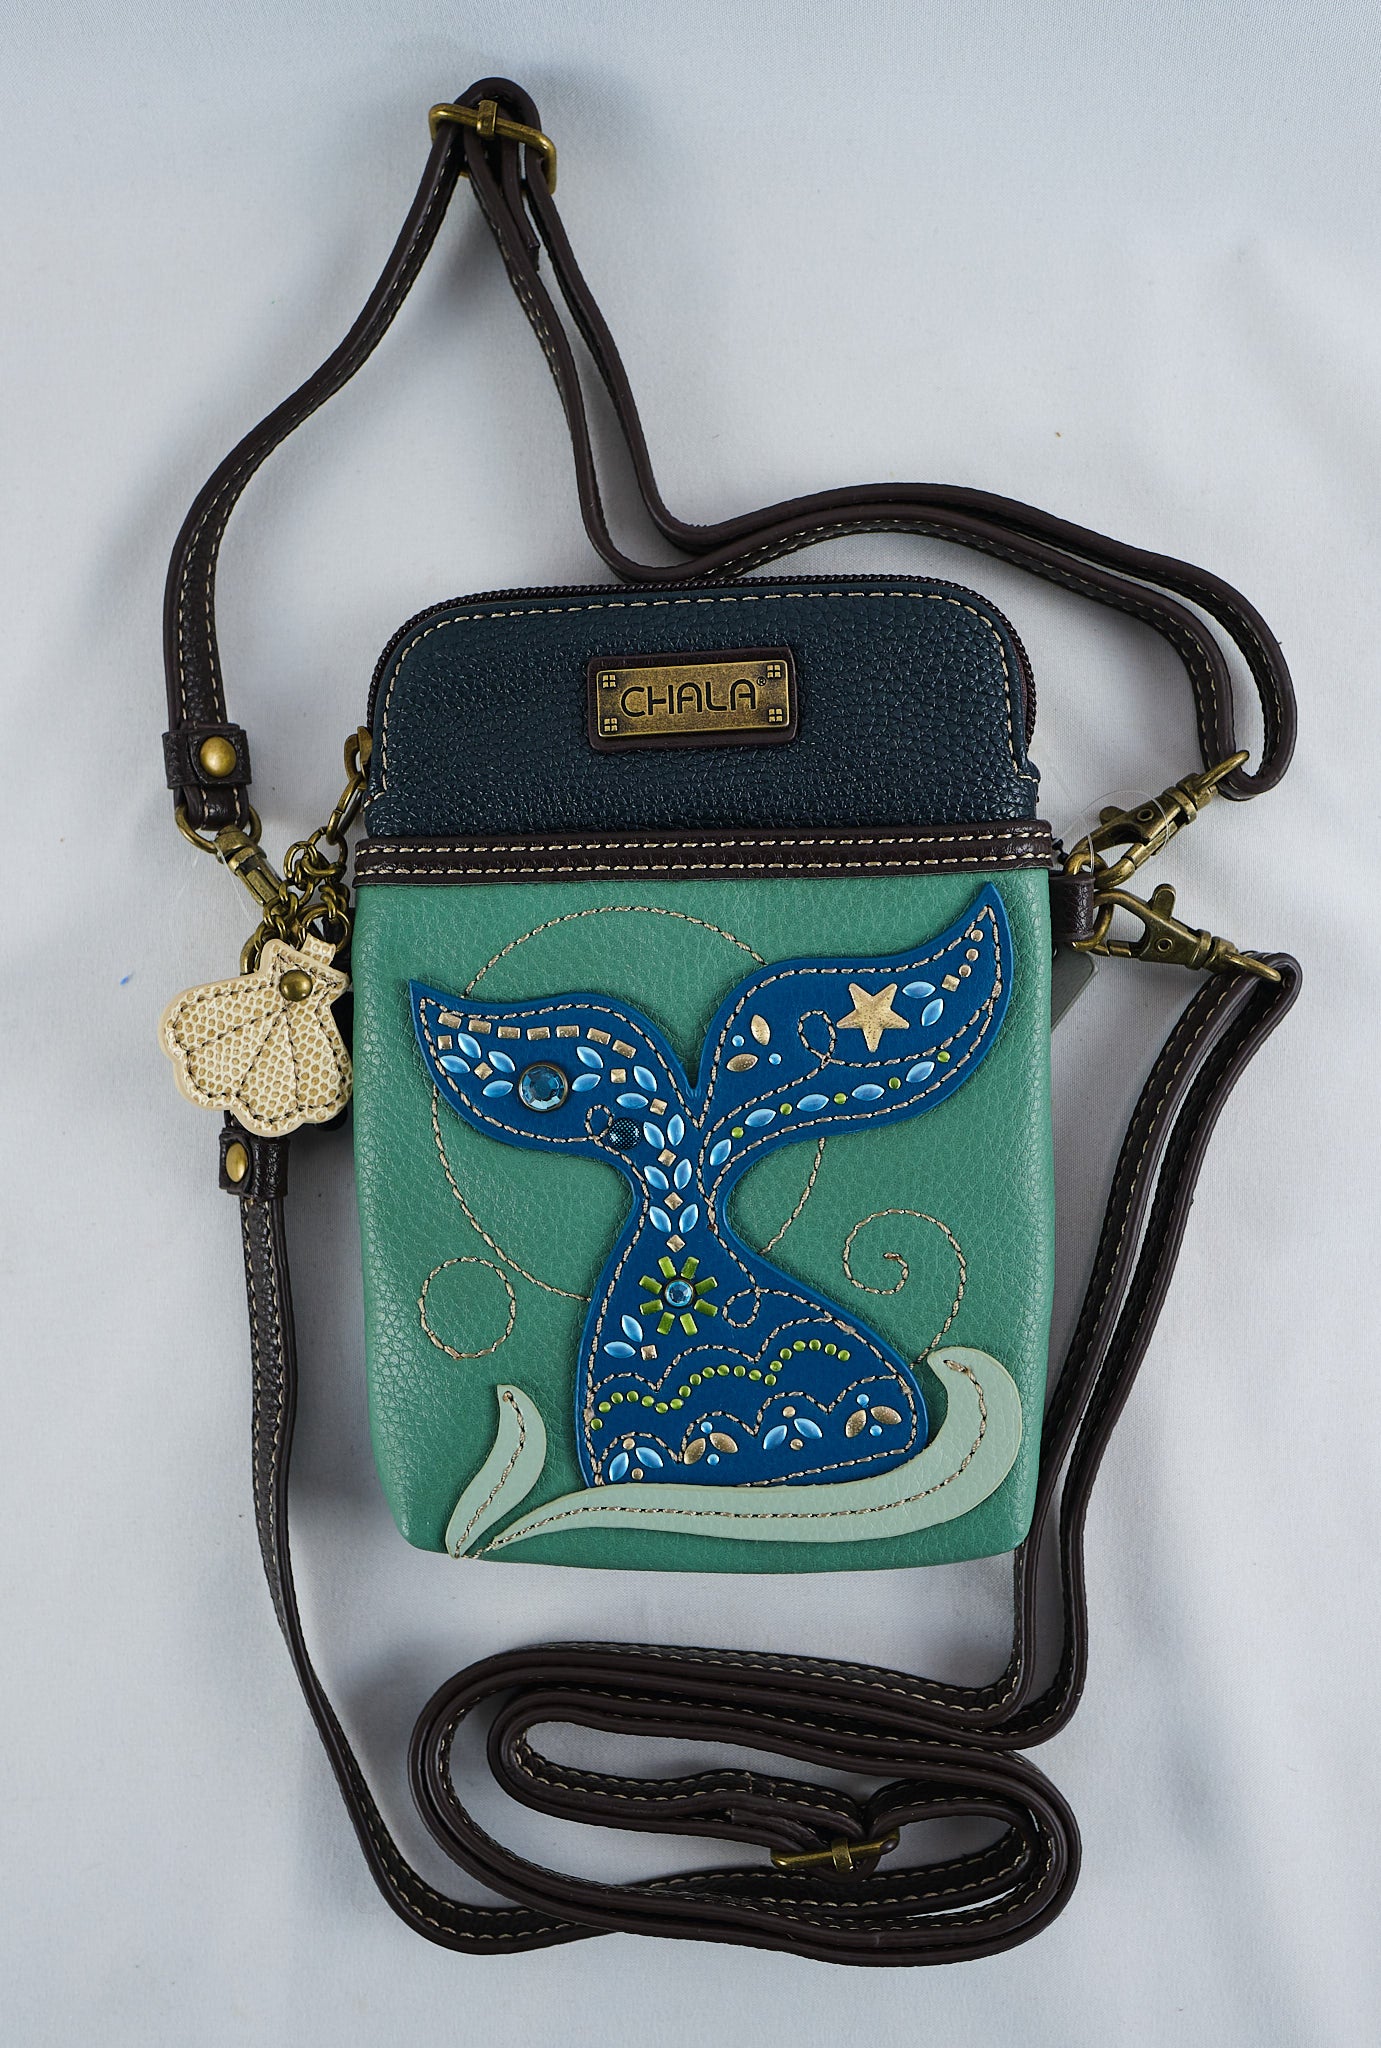 Small Crossbody Cell Phone Purse for Women,whale wave,Cellphone Bags  Handbags Shoulder Bag Purse